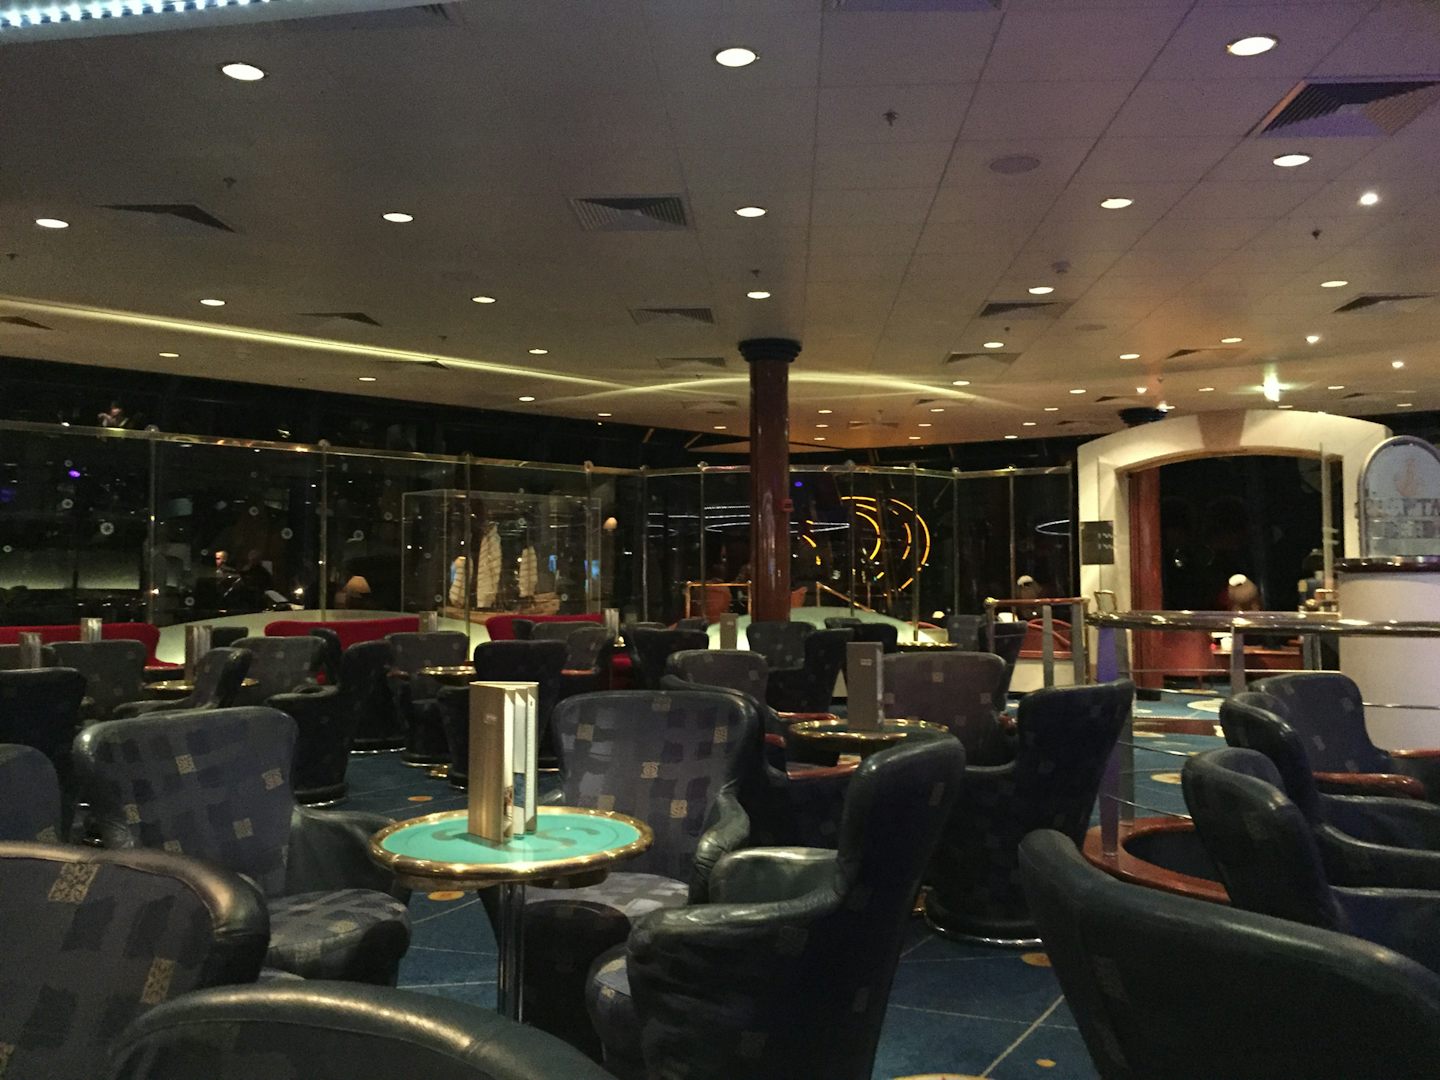 Galaxy of the Stars Lounge (Deck 12)